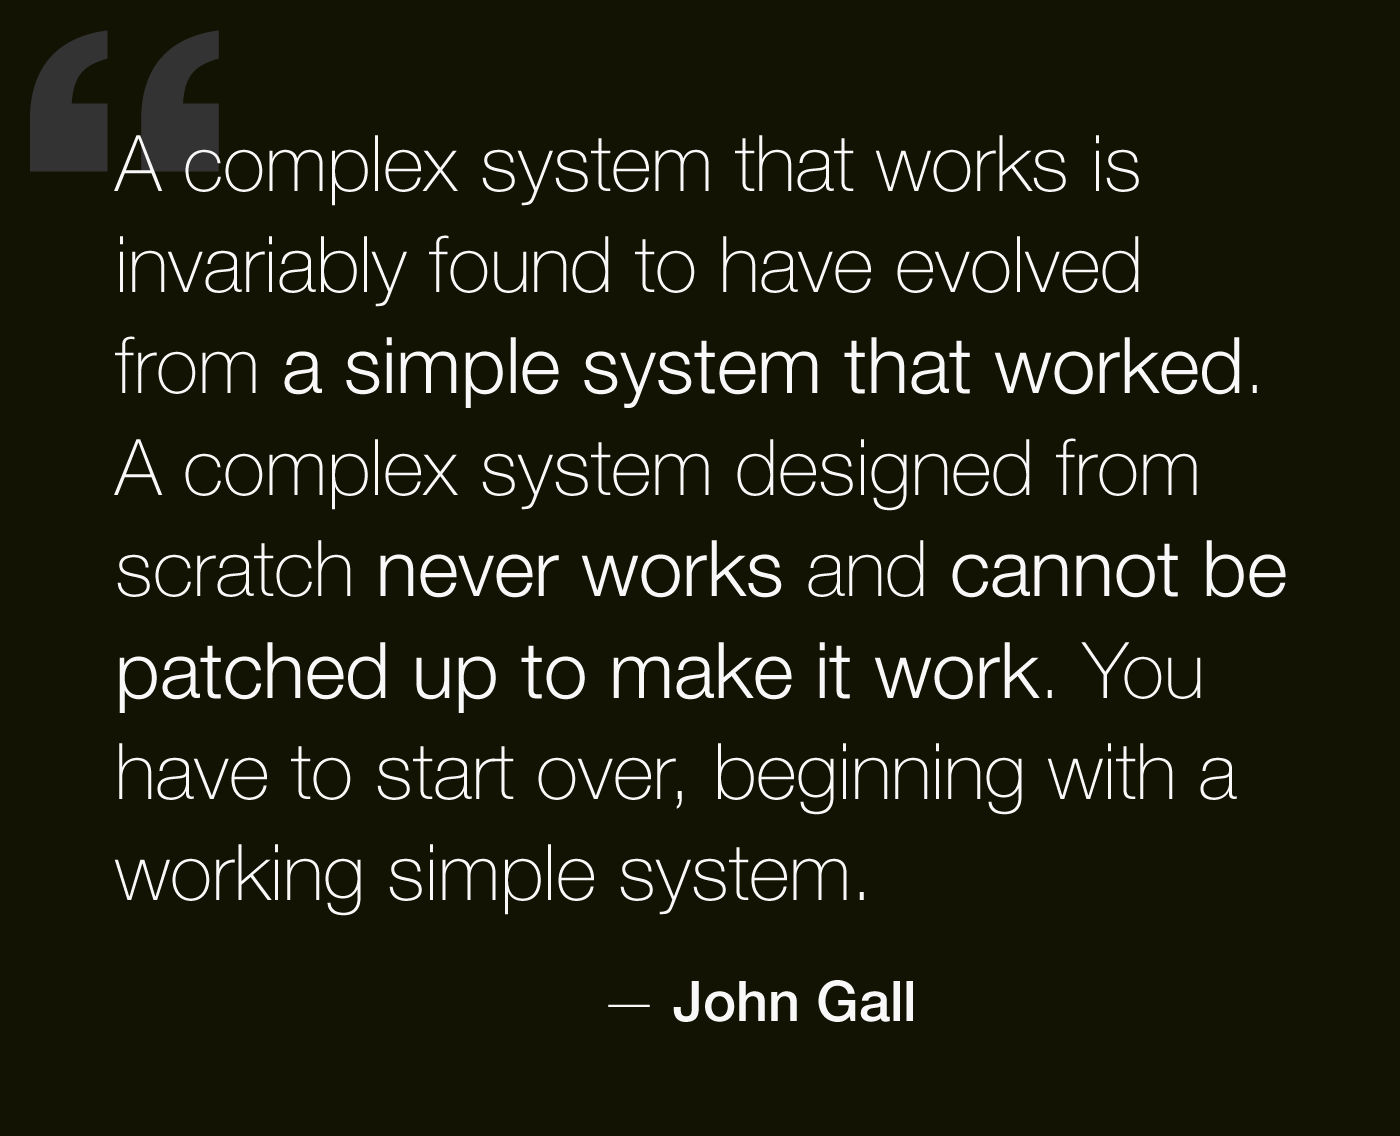 A complex system that works is invariably found to have evolved from a simple system that works. The inverse proposition also appears to be true: A complex system designed from scratch never works and cannot be made to work. - John Gall, Systemantics, 1975.